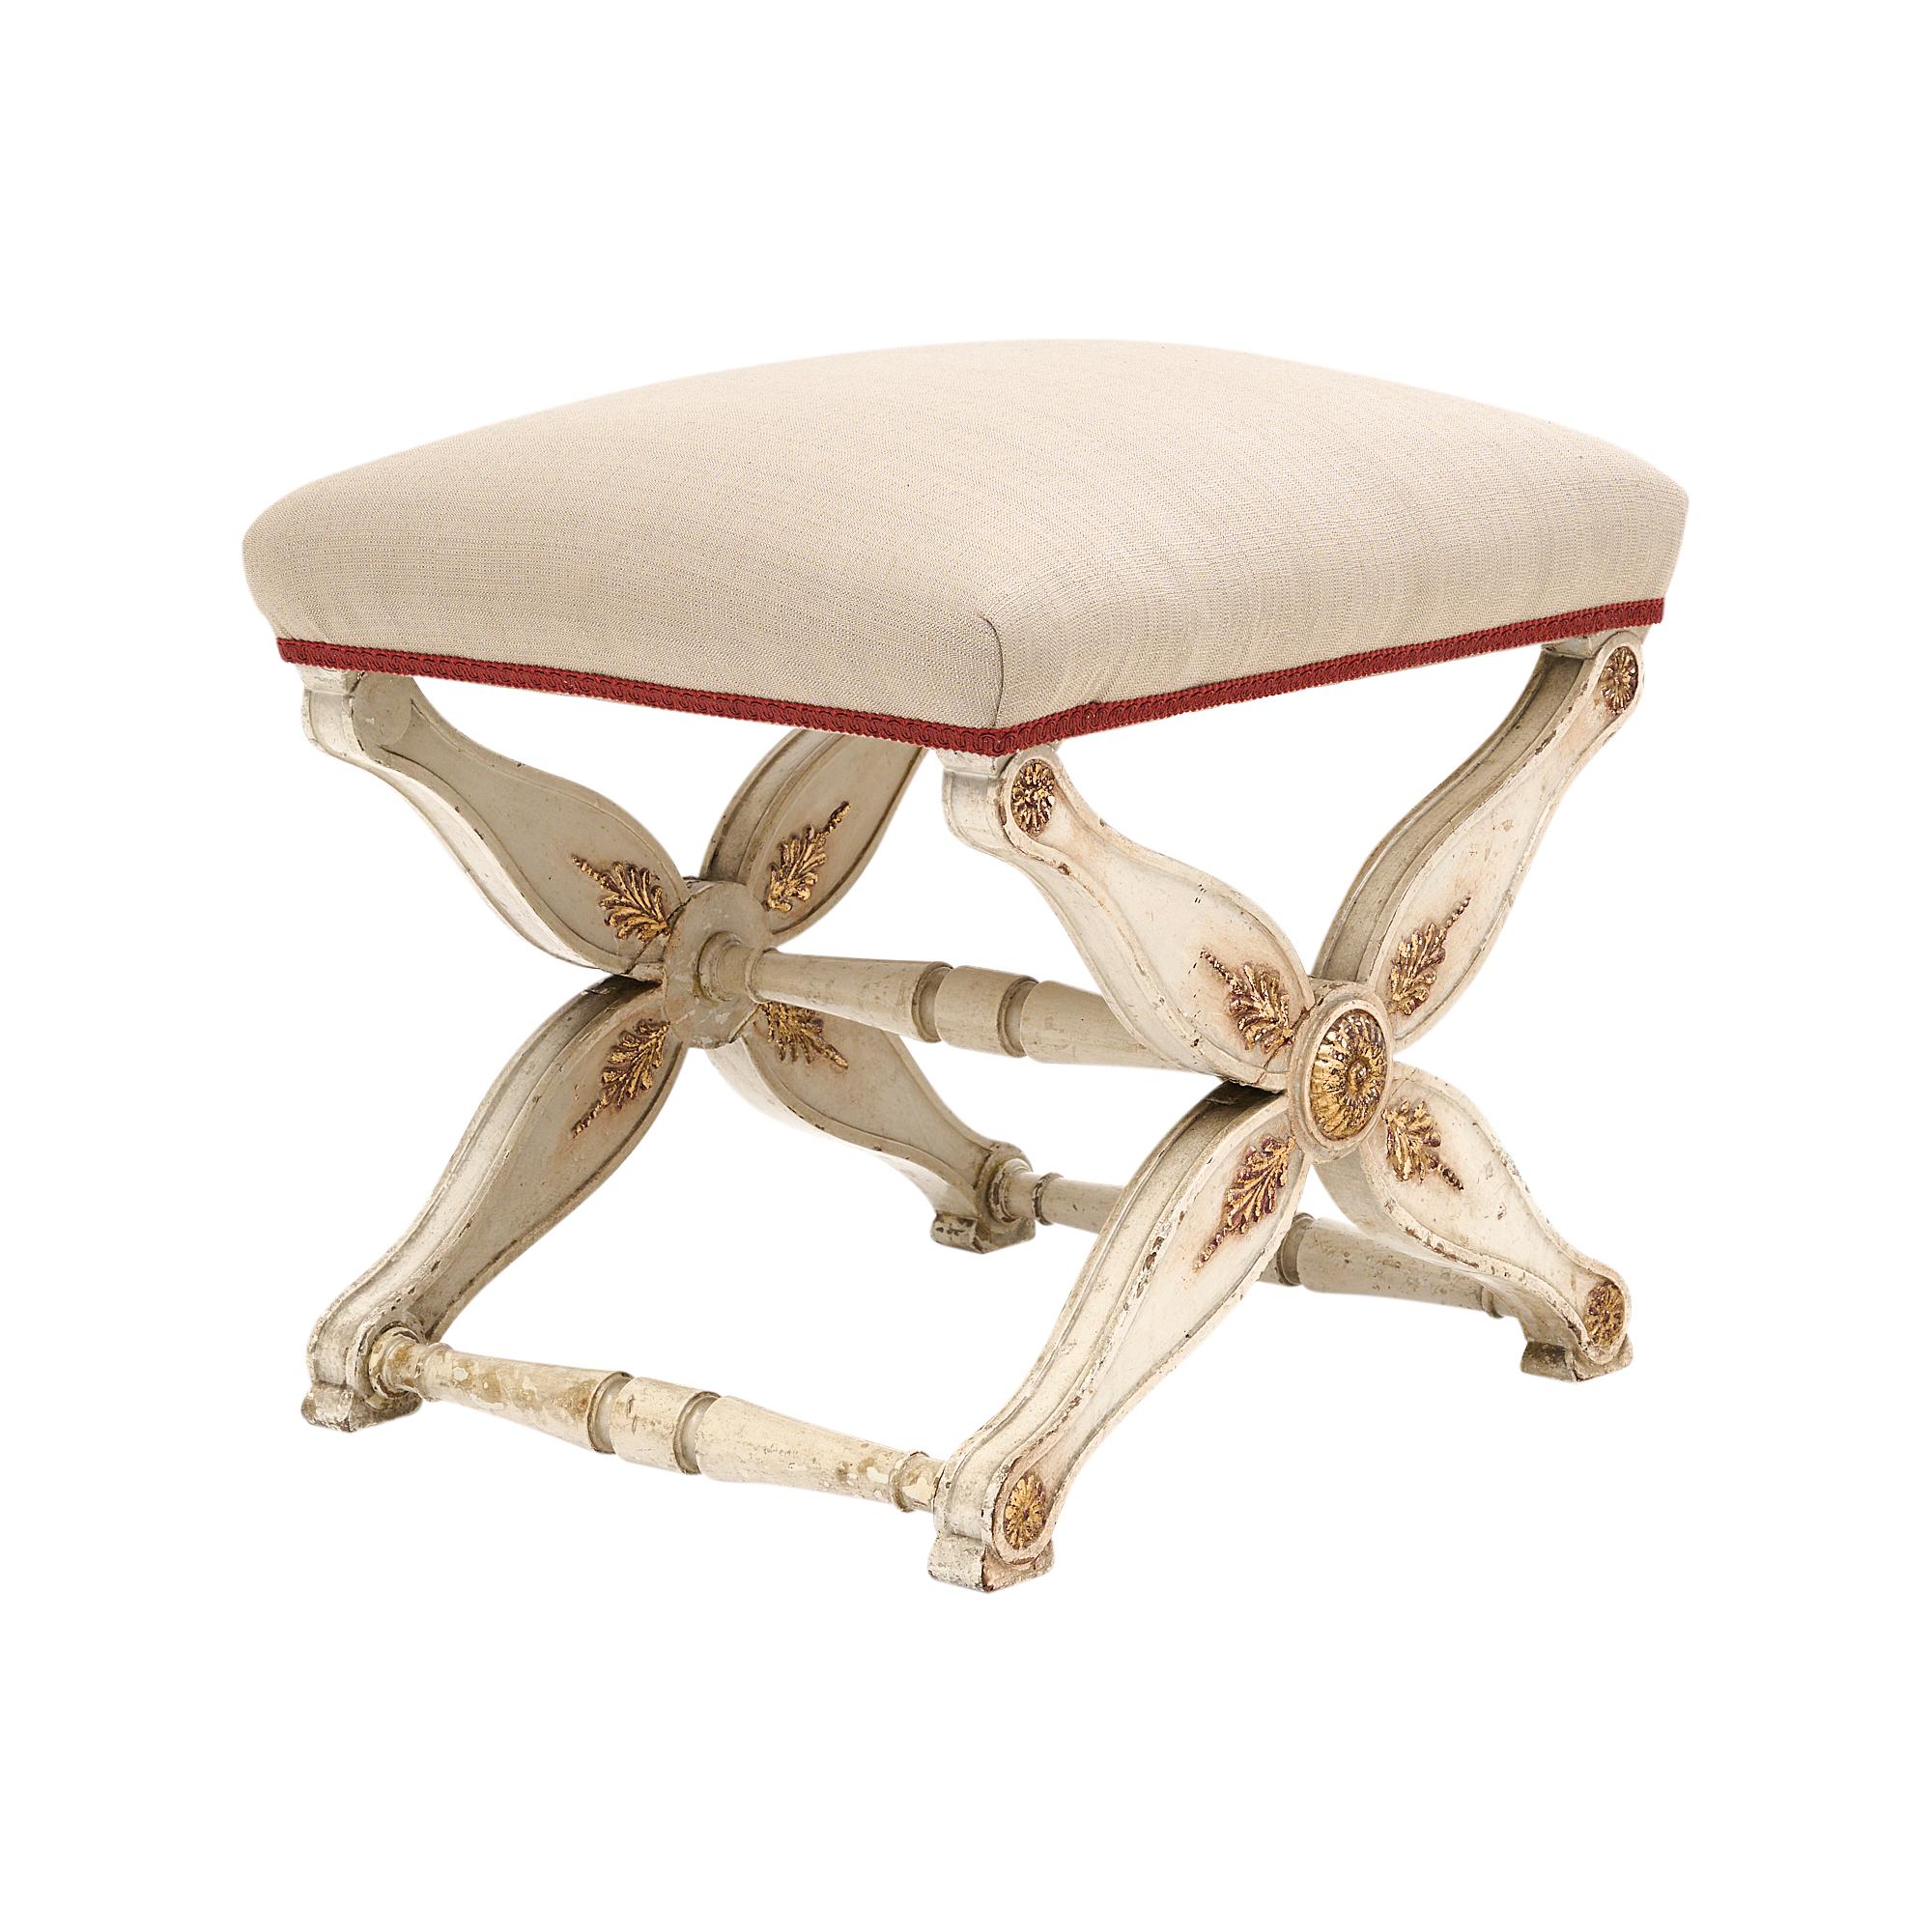 Curule stool, French, made of hand-carved and hand-painted beech wood in a beautiful Trianon gray color. There are gold leaf accents throughout. Newly upholstered in a linen blend.